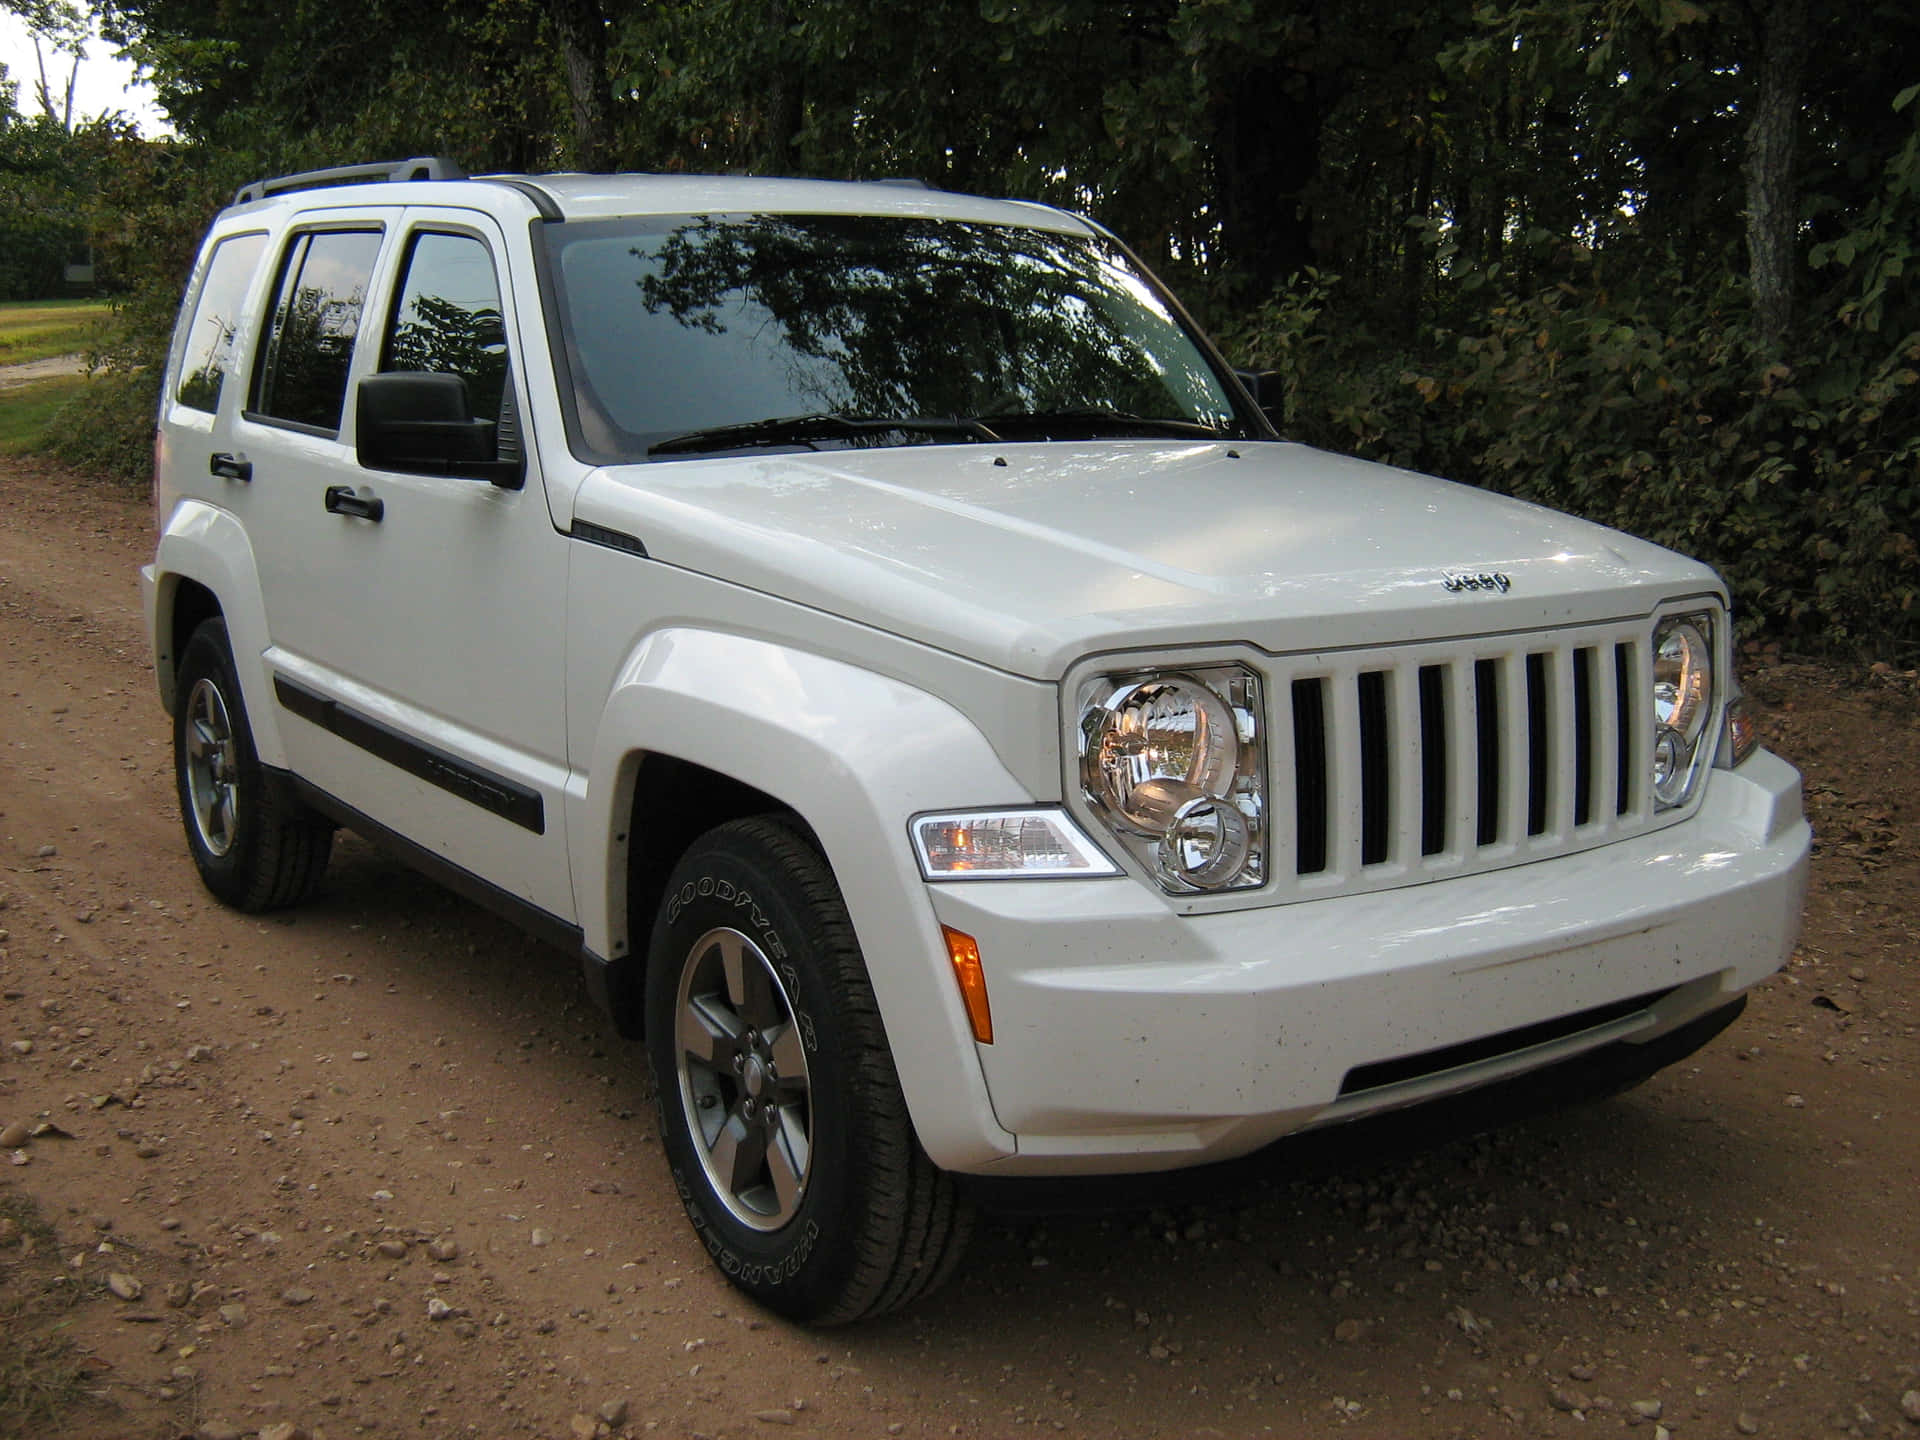 Rugged Jeep Liberty SUV on Adventure-filled Terrain Wallpaper